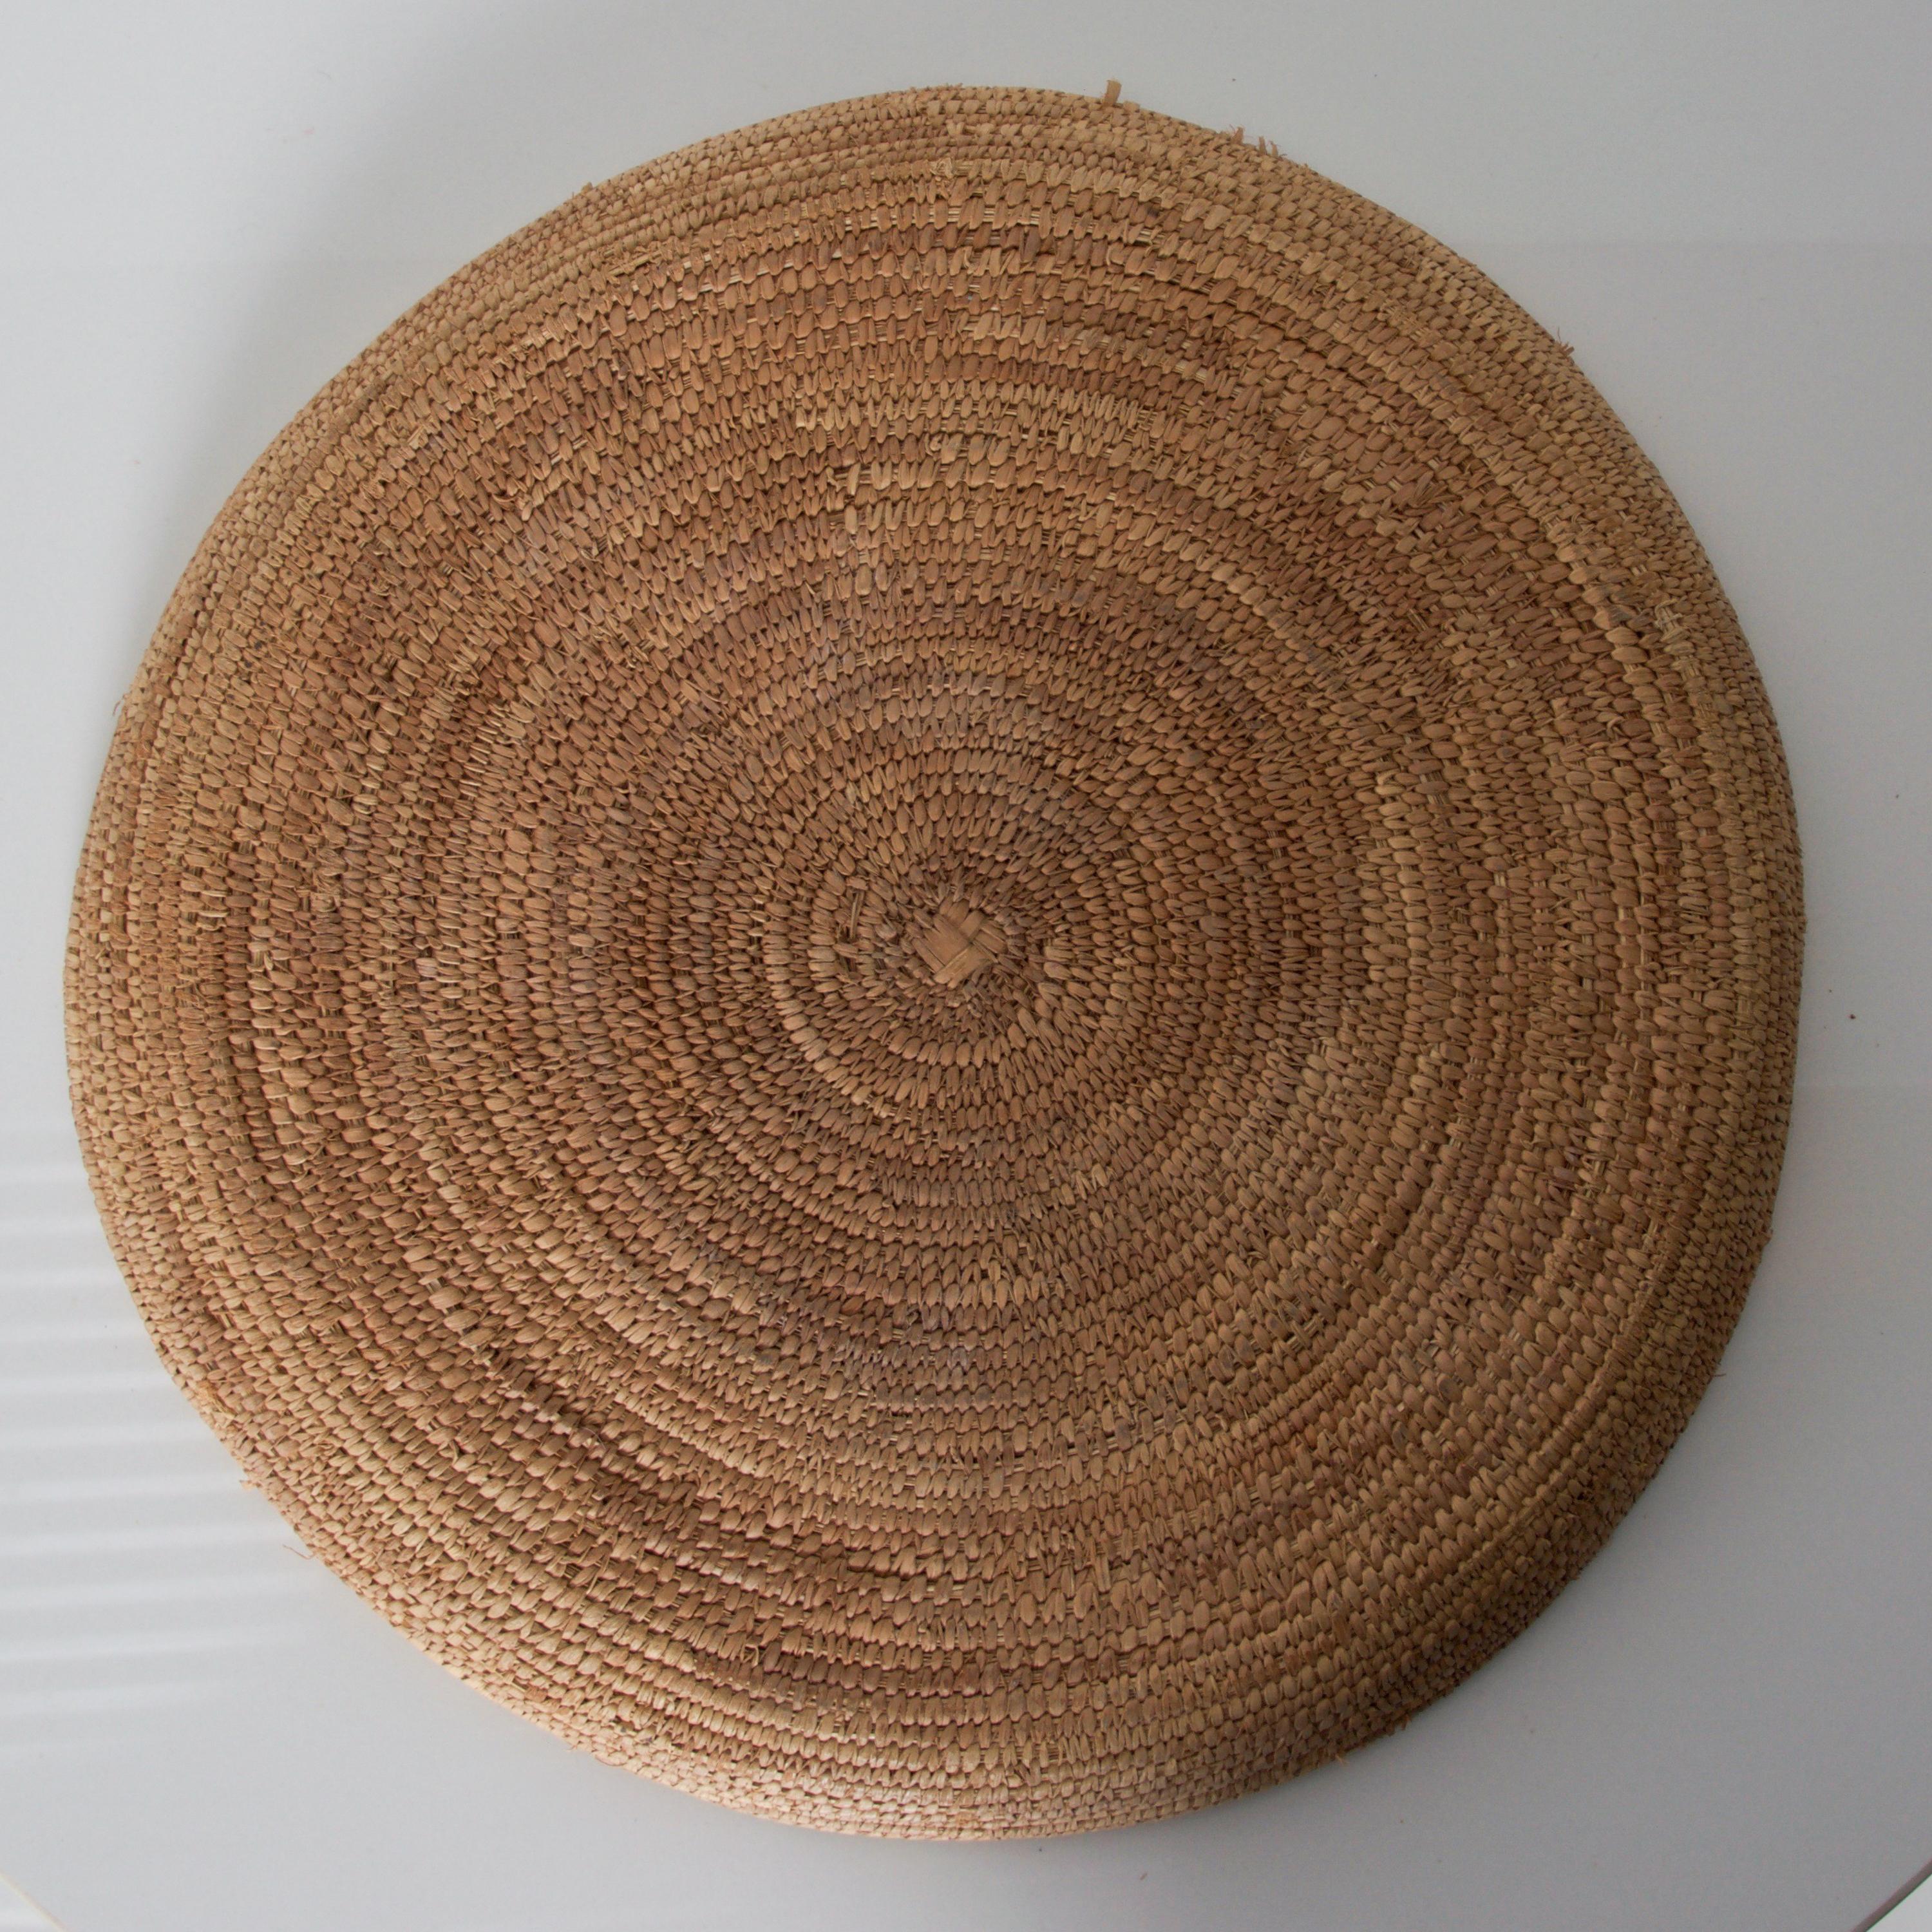 Native American Indian handmade woven large flat coiled saucer basket tray, 1930s
Measures: 14